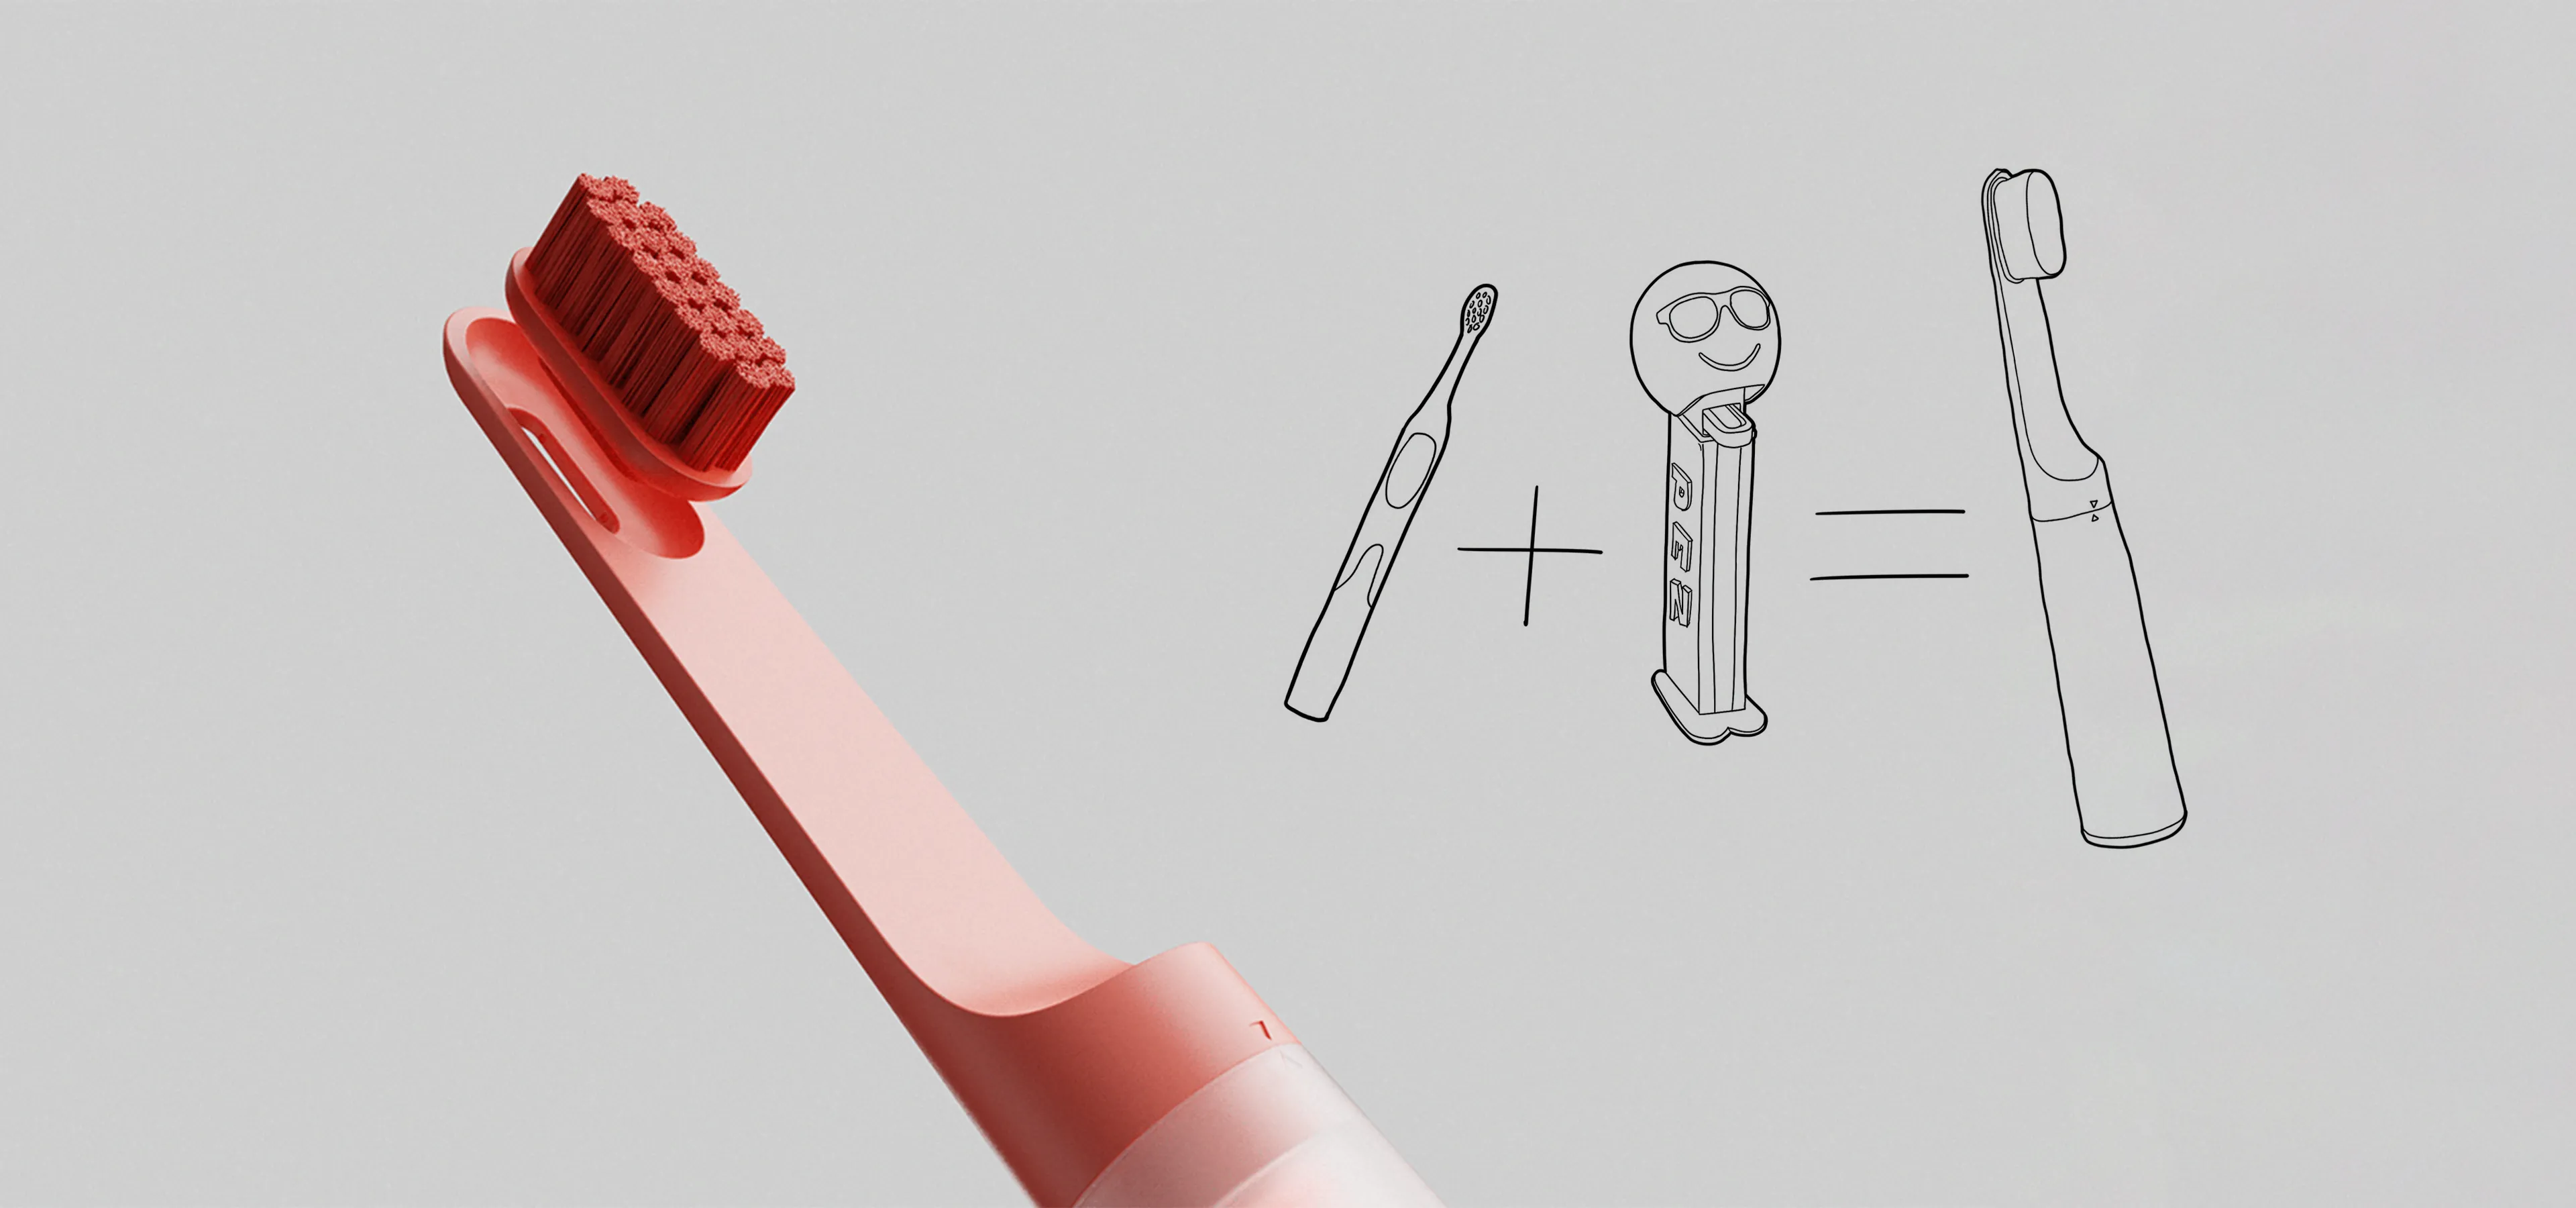 A combination of Pez dispenser and toothbrush, dispensing toothpaste tablets while you brush